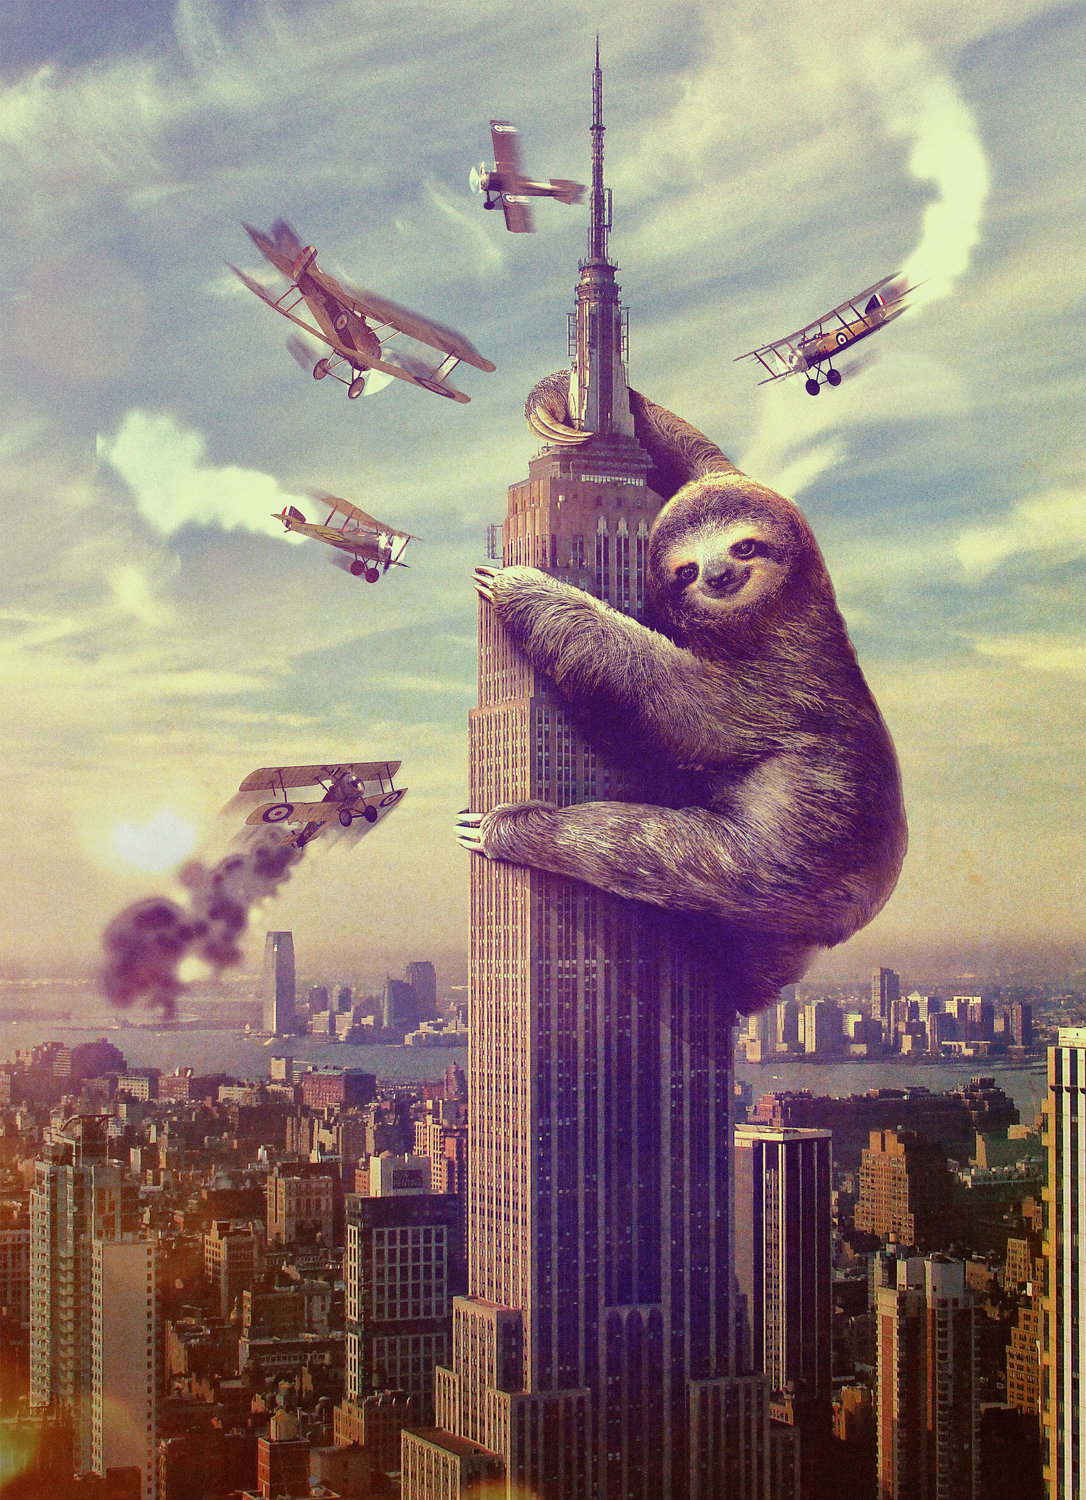 Slothzilla, Sloth Card, Funny Christmas Card, 3-Pack of Stationary Cards with Matching Envelope